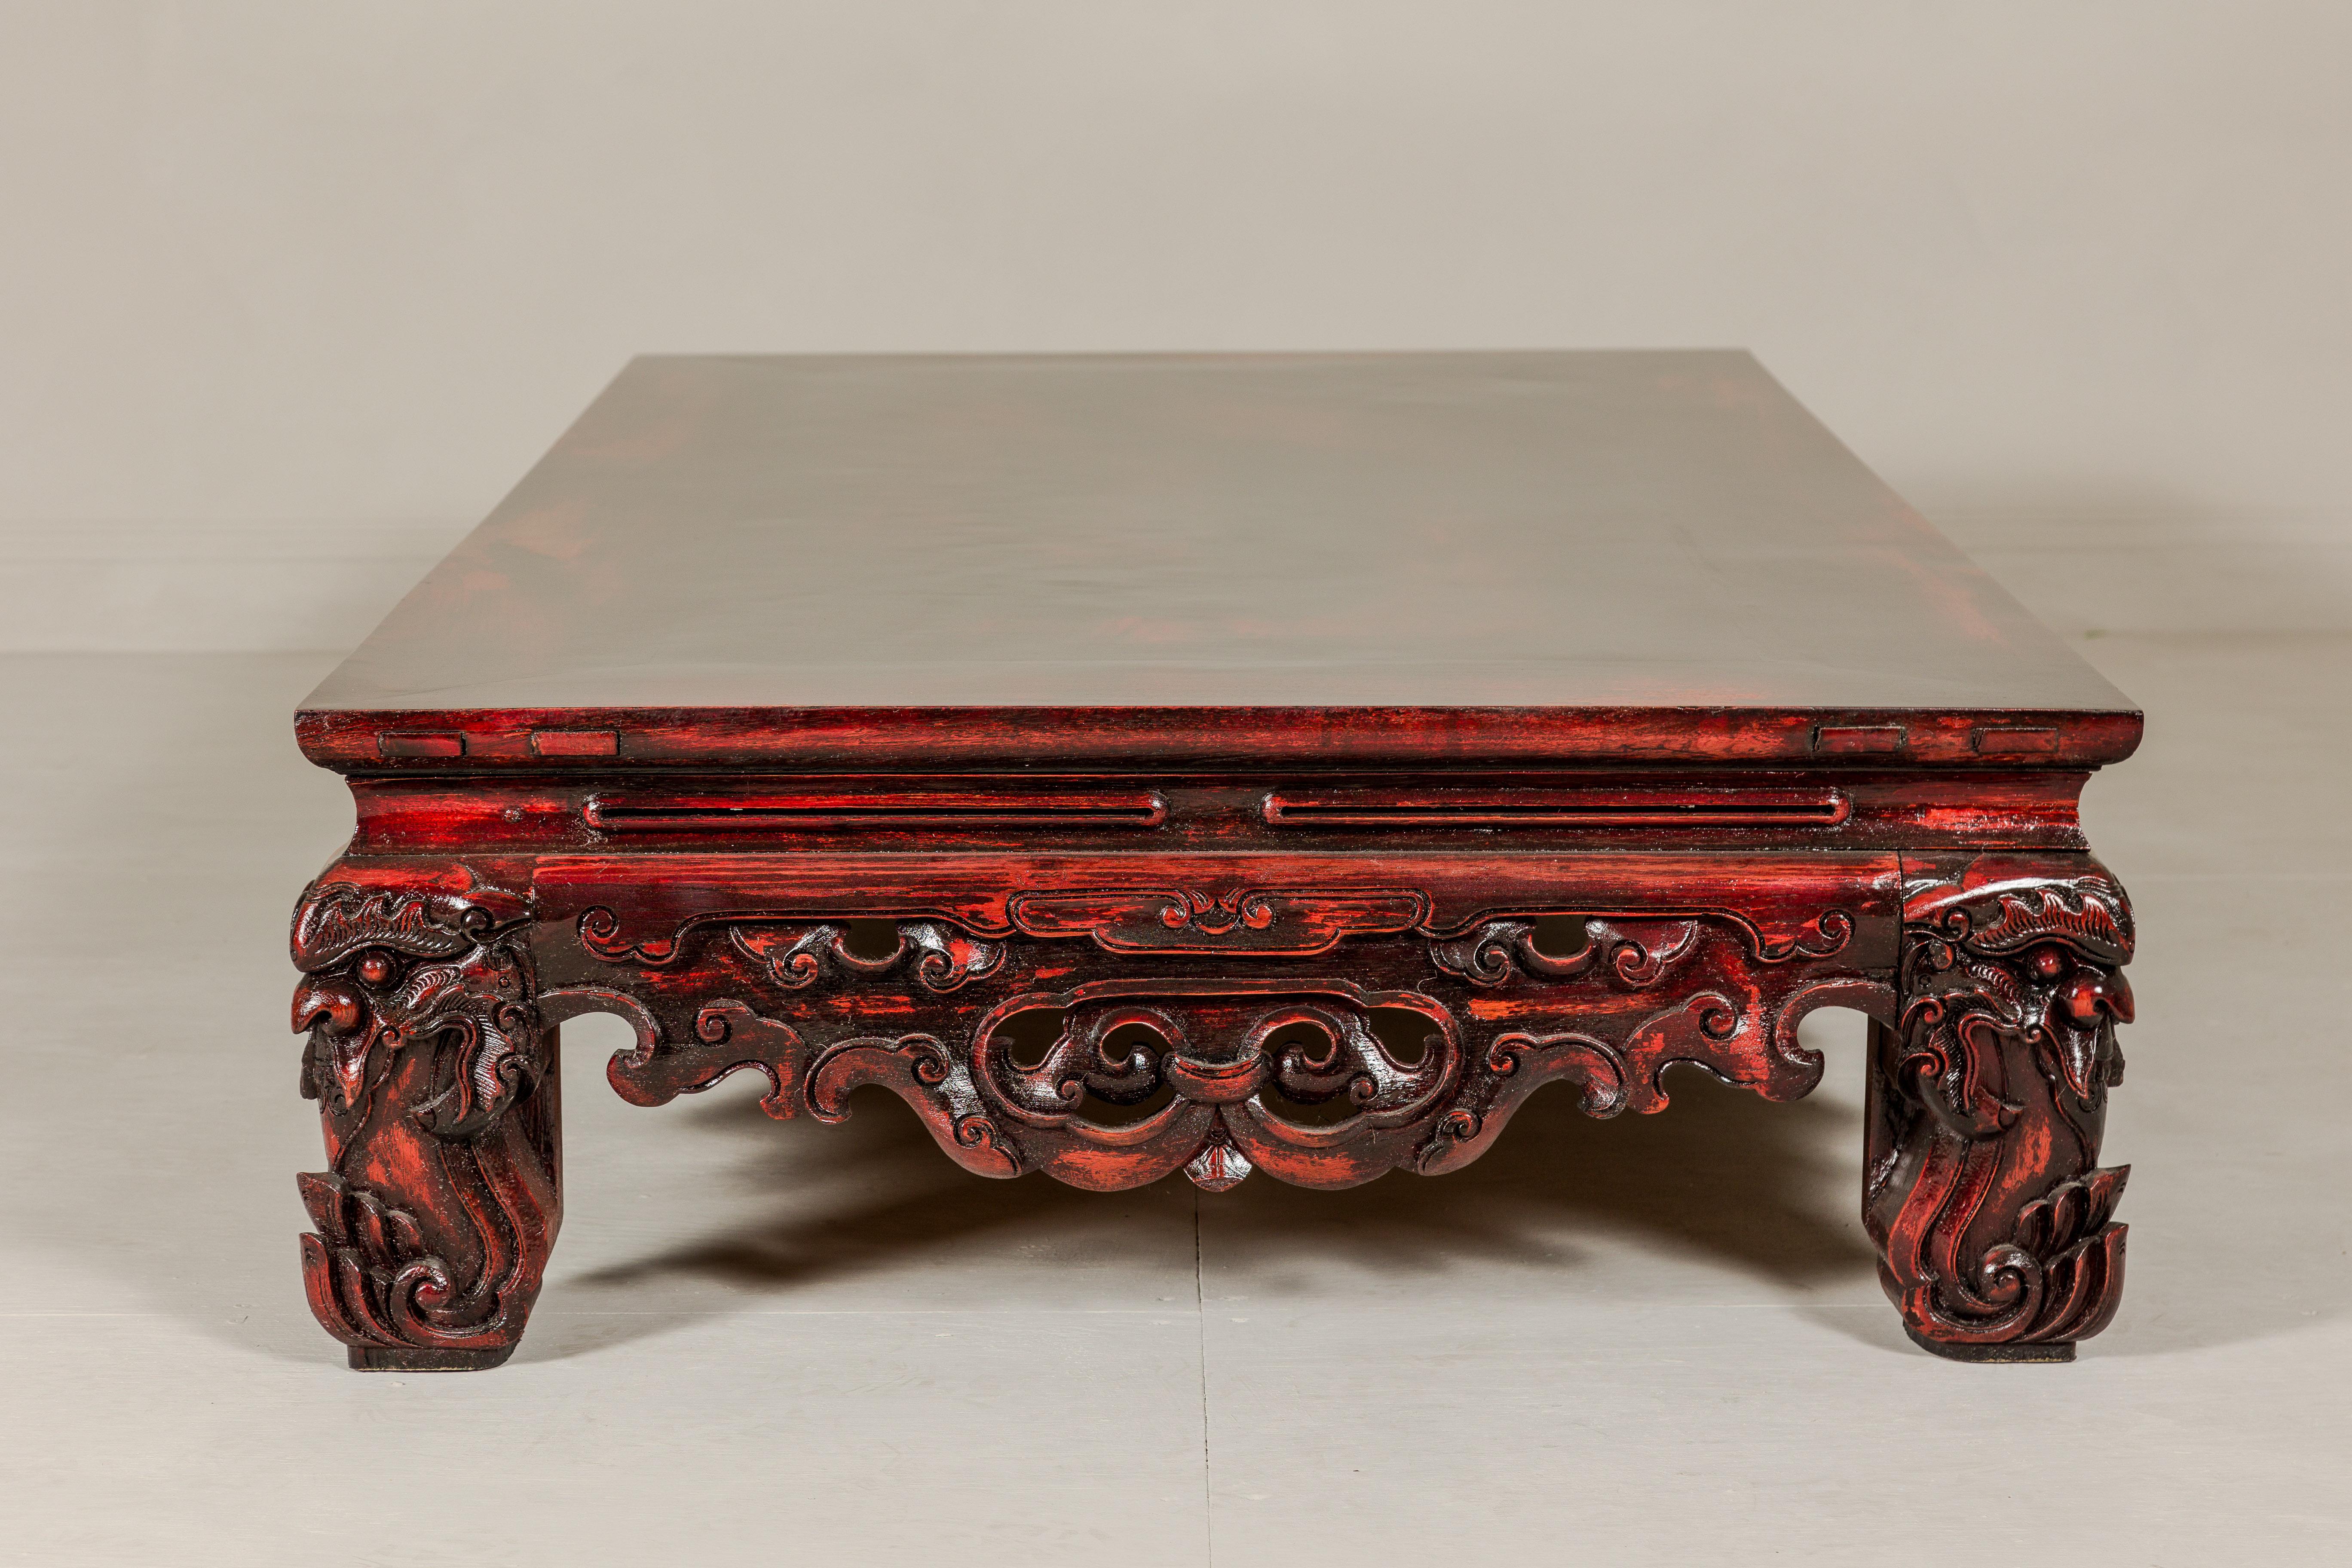 Qing Dynasty Low Kang Coffee Table with Reddish Brown Finish and Carved Décor For Sale 3